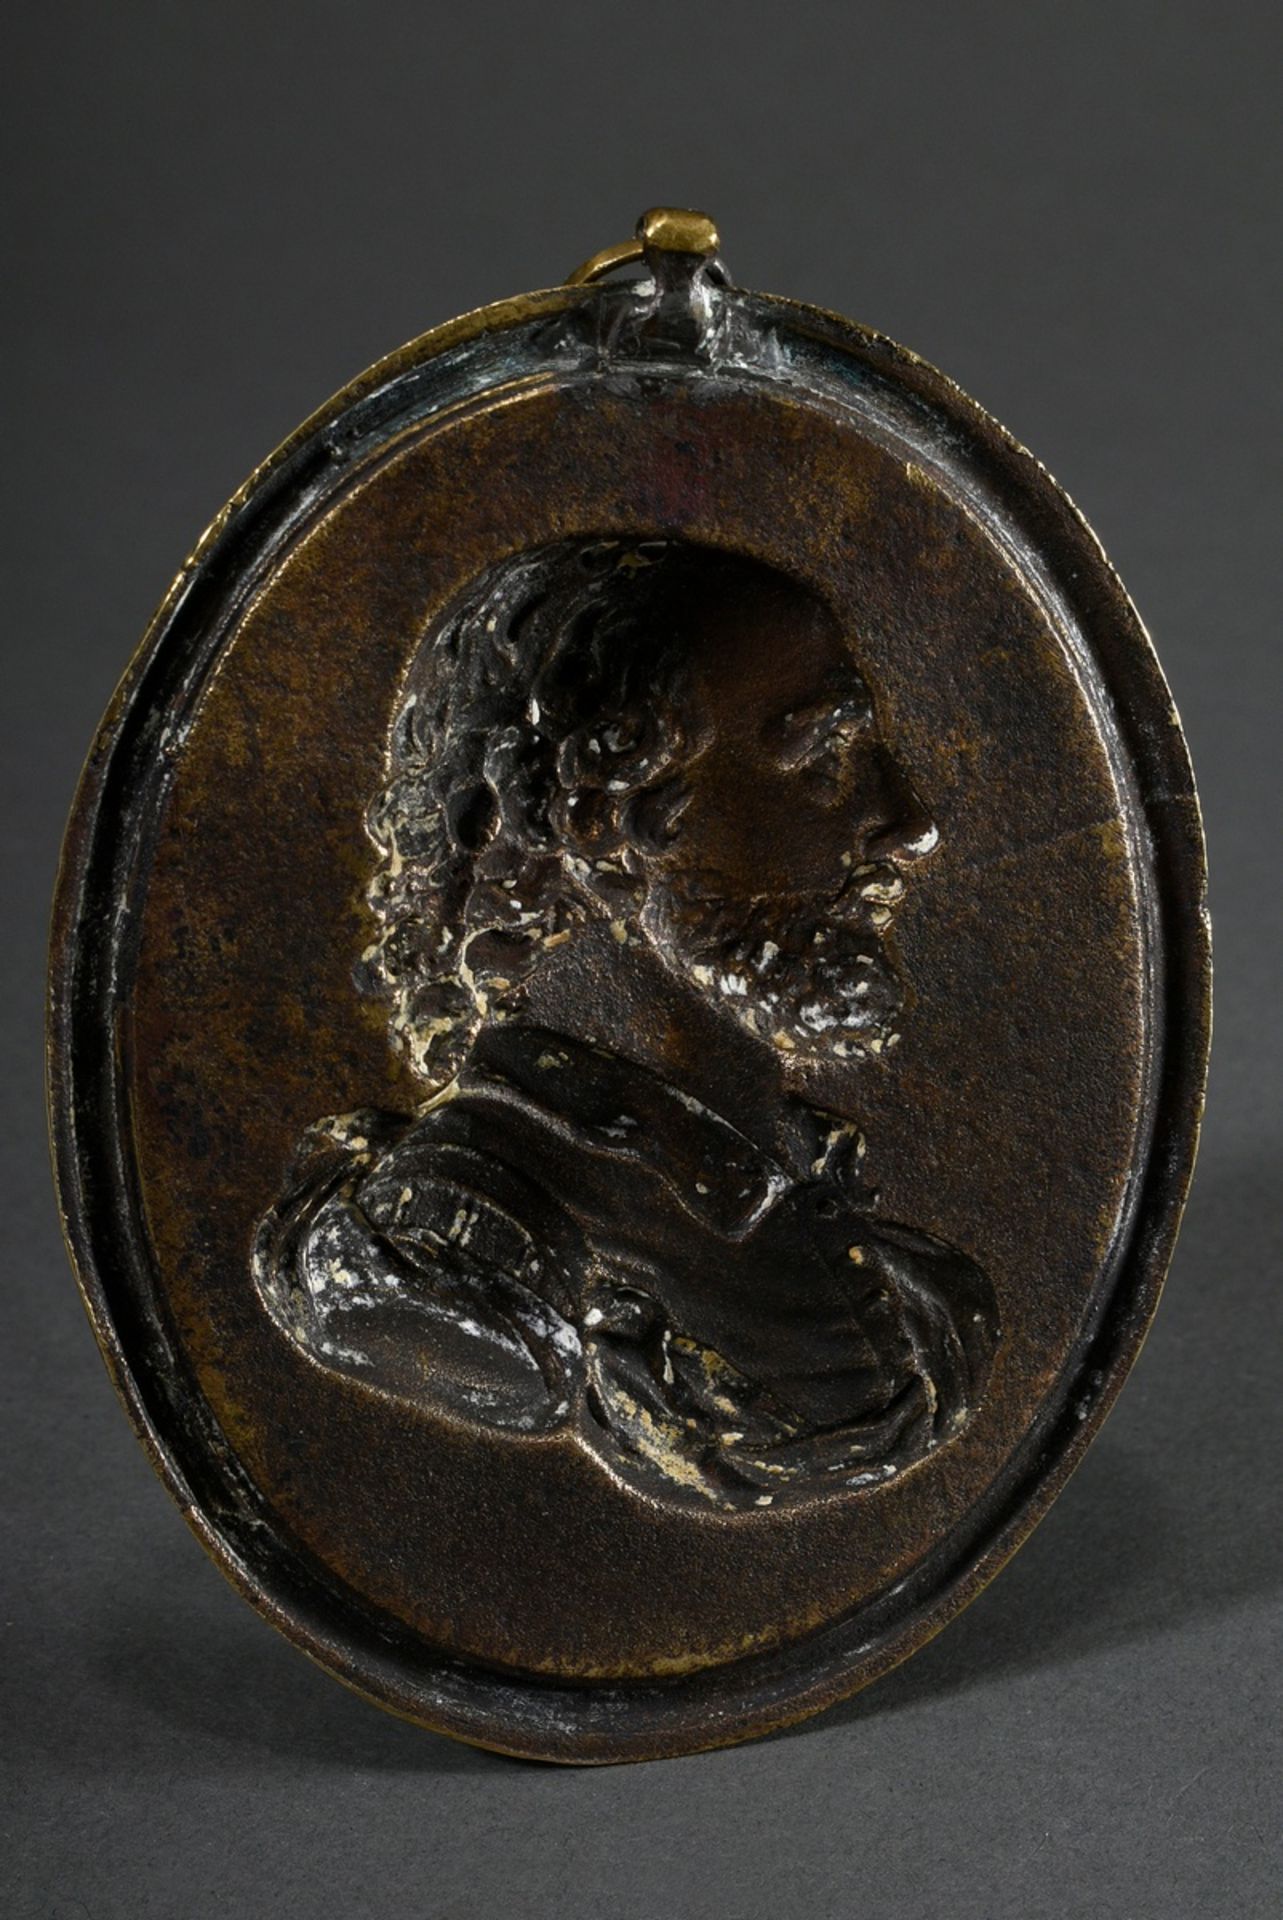 Polished bronze relief plaque "William Shakespeare" in oval form, 18th/19th c.,11x9cm, slight scrat - Image 2 of 2